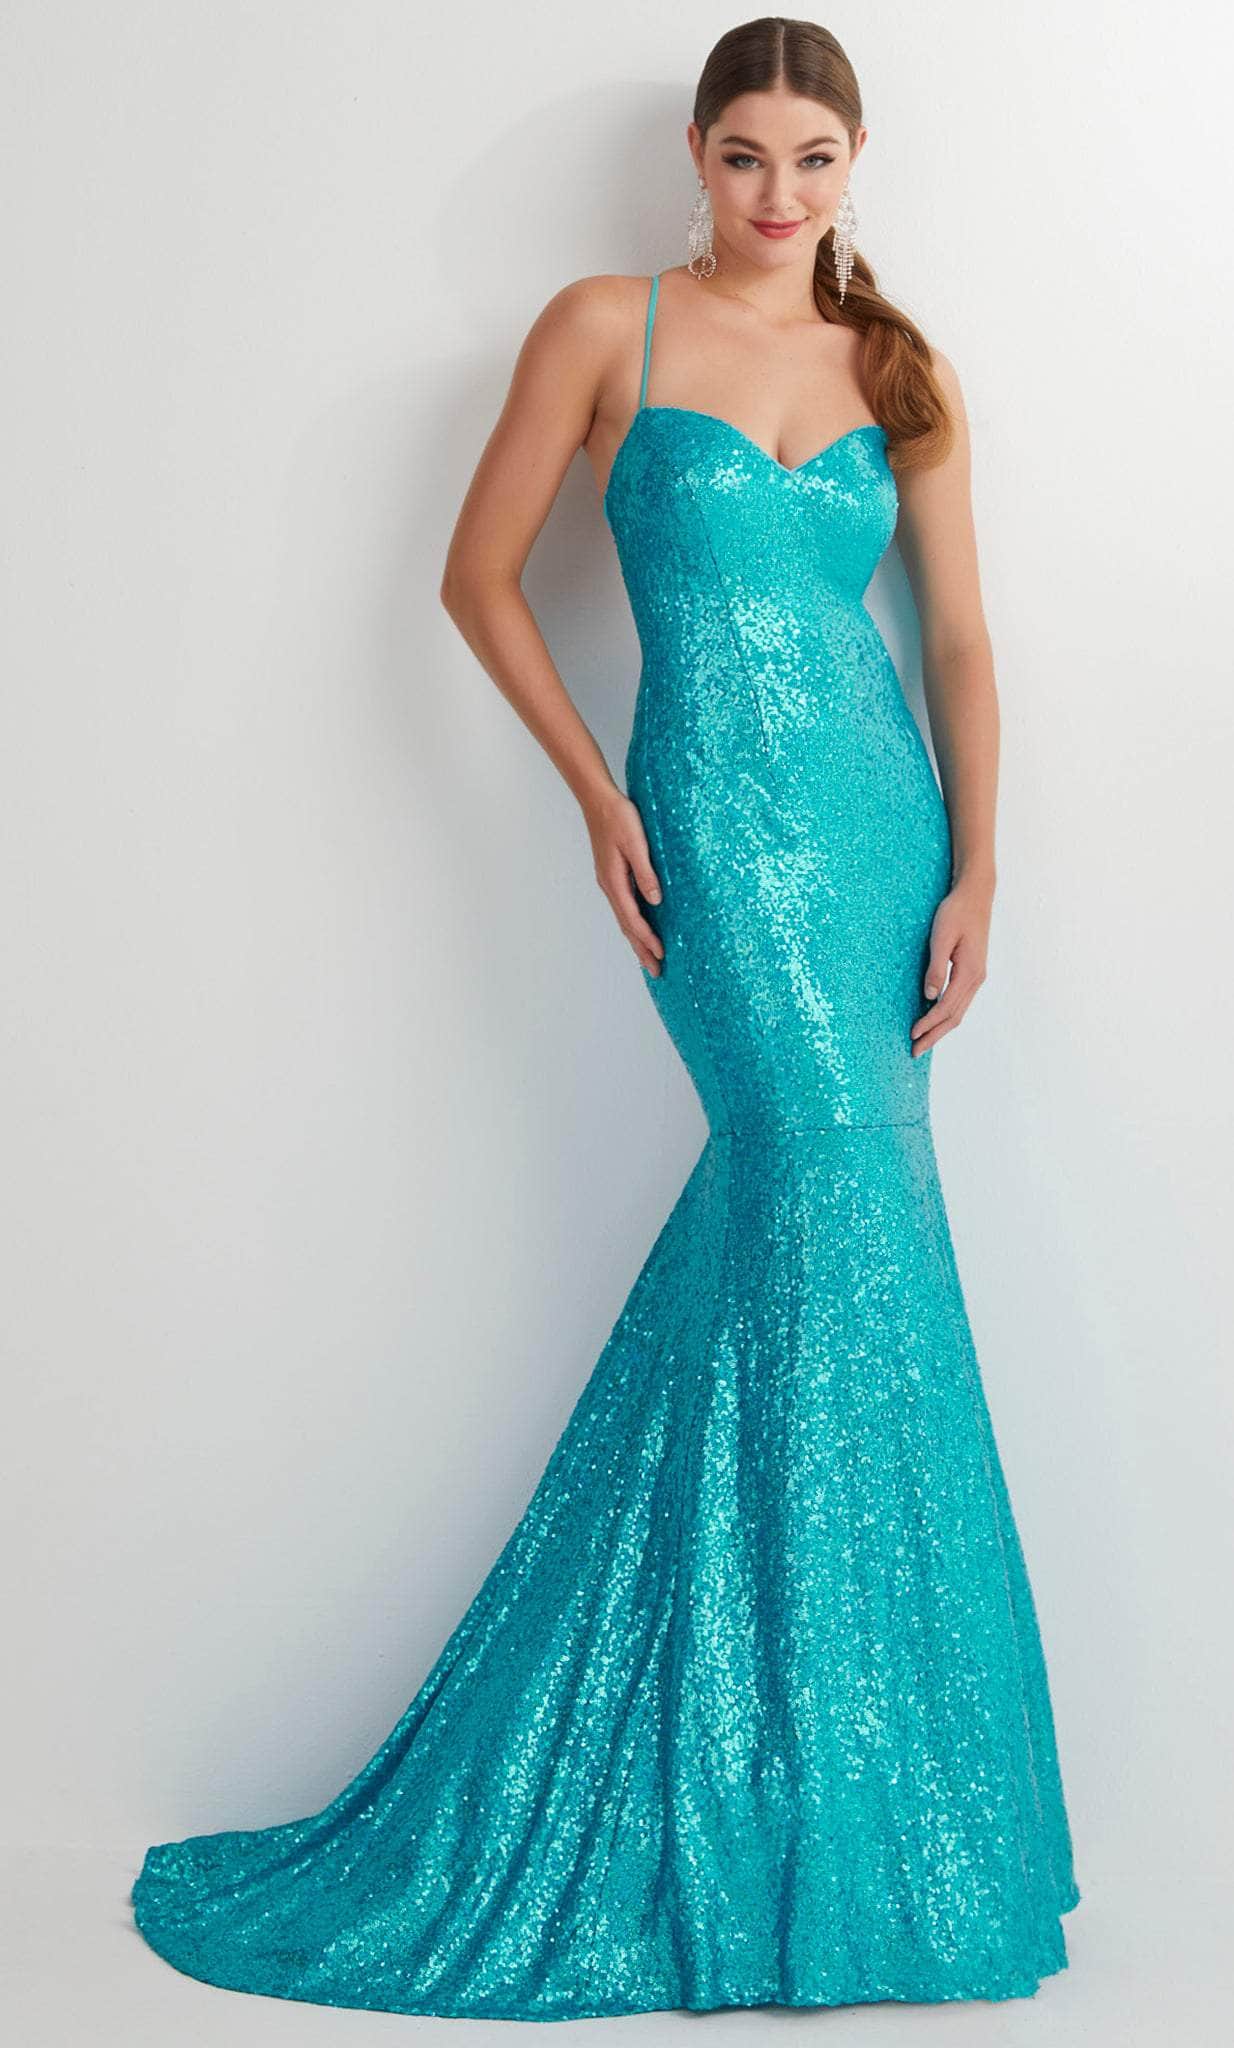 Image of Studio 17 Prom 12912 - Sleeveless Sweetheart Prom Gown